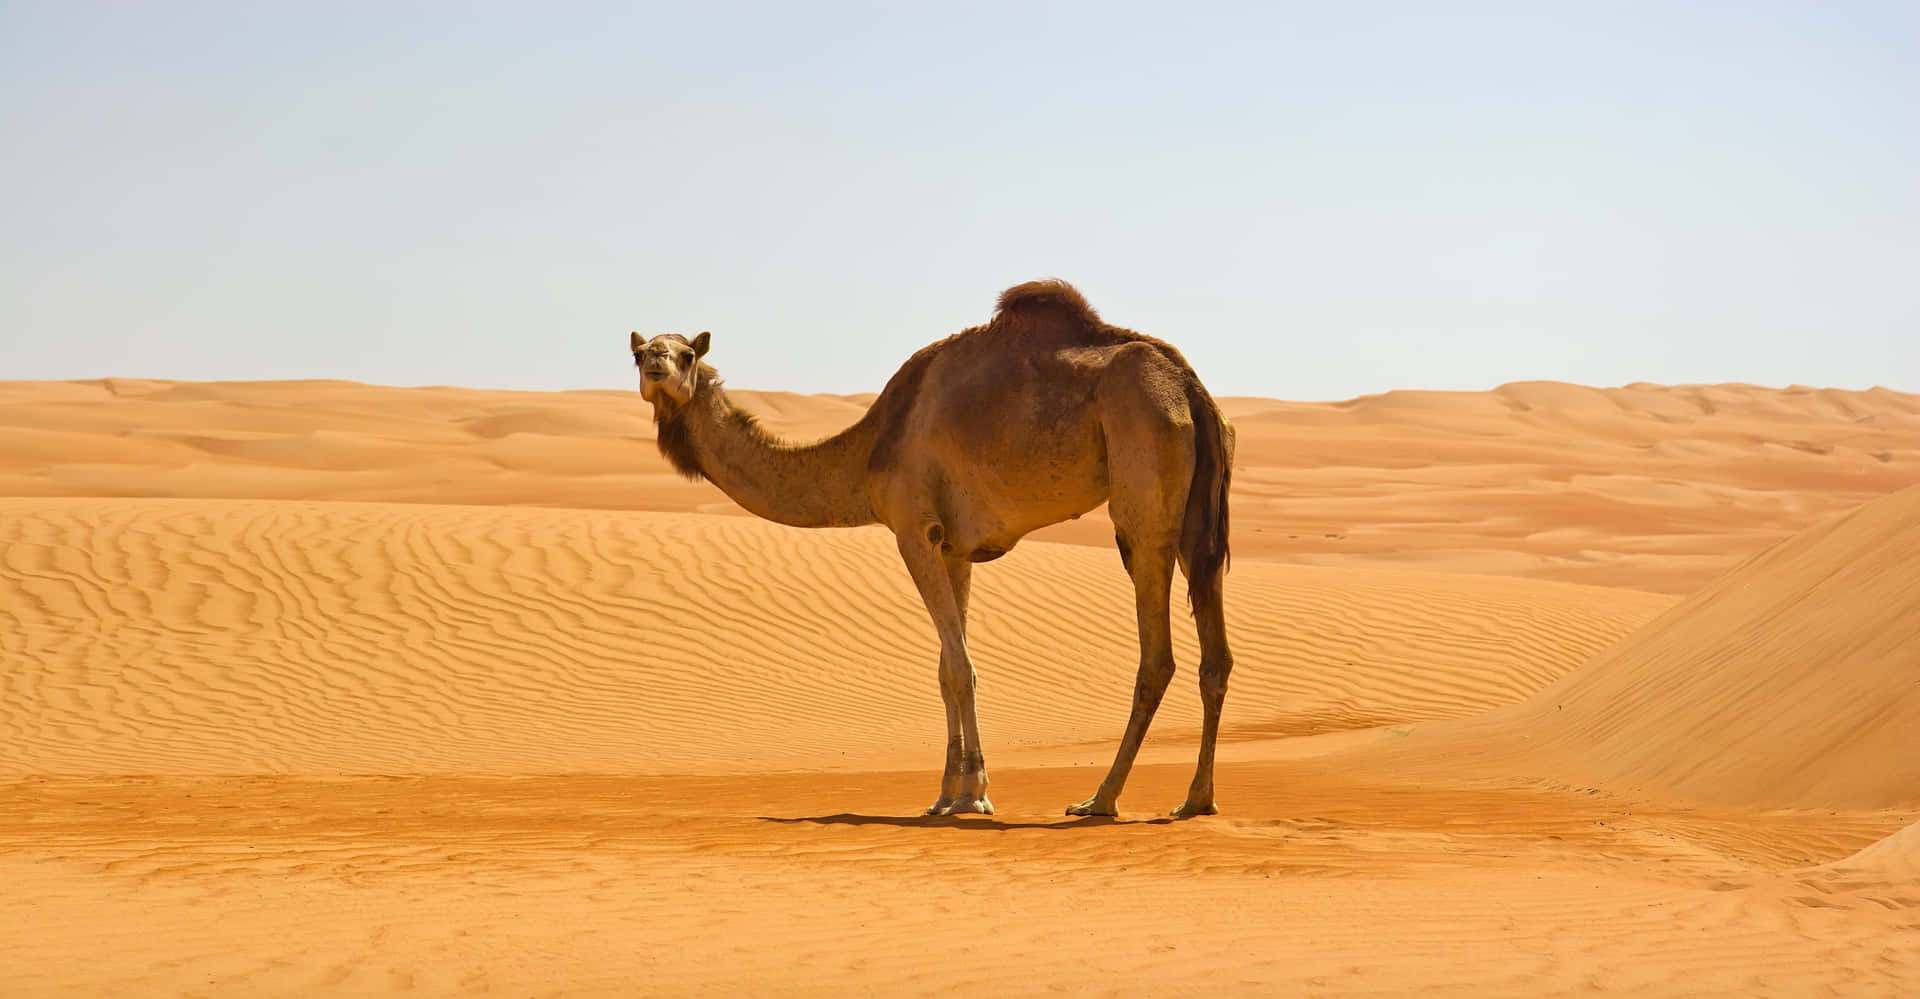 A camel in the Arabian desert, surrounded by nothing but sand.